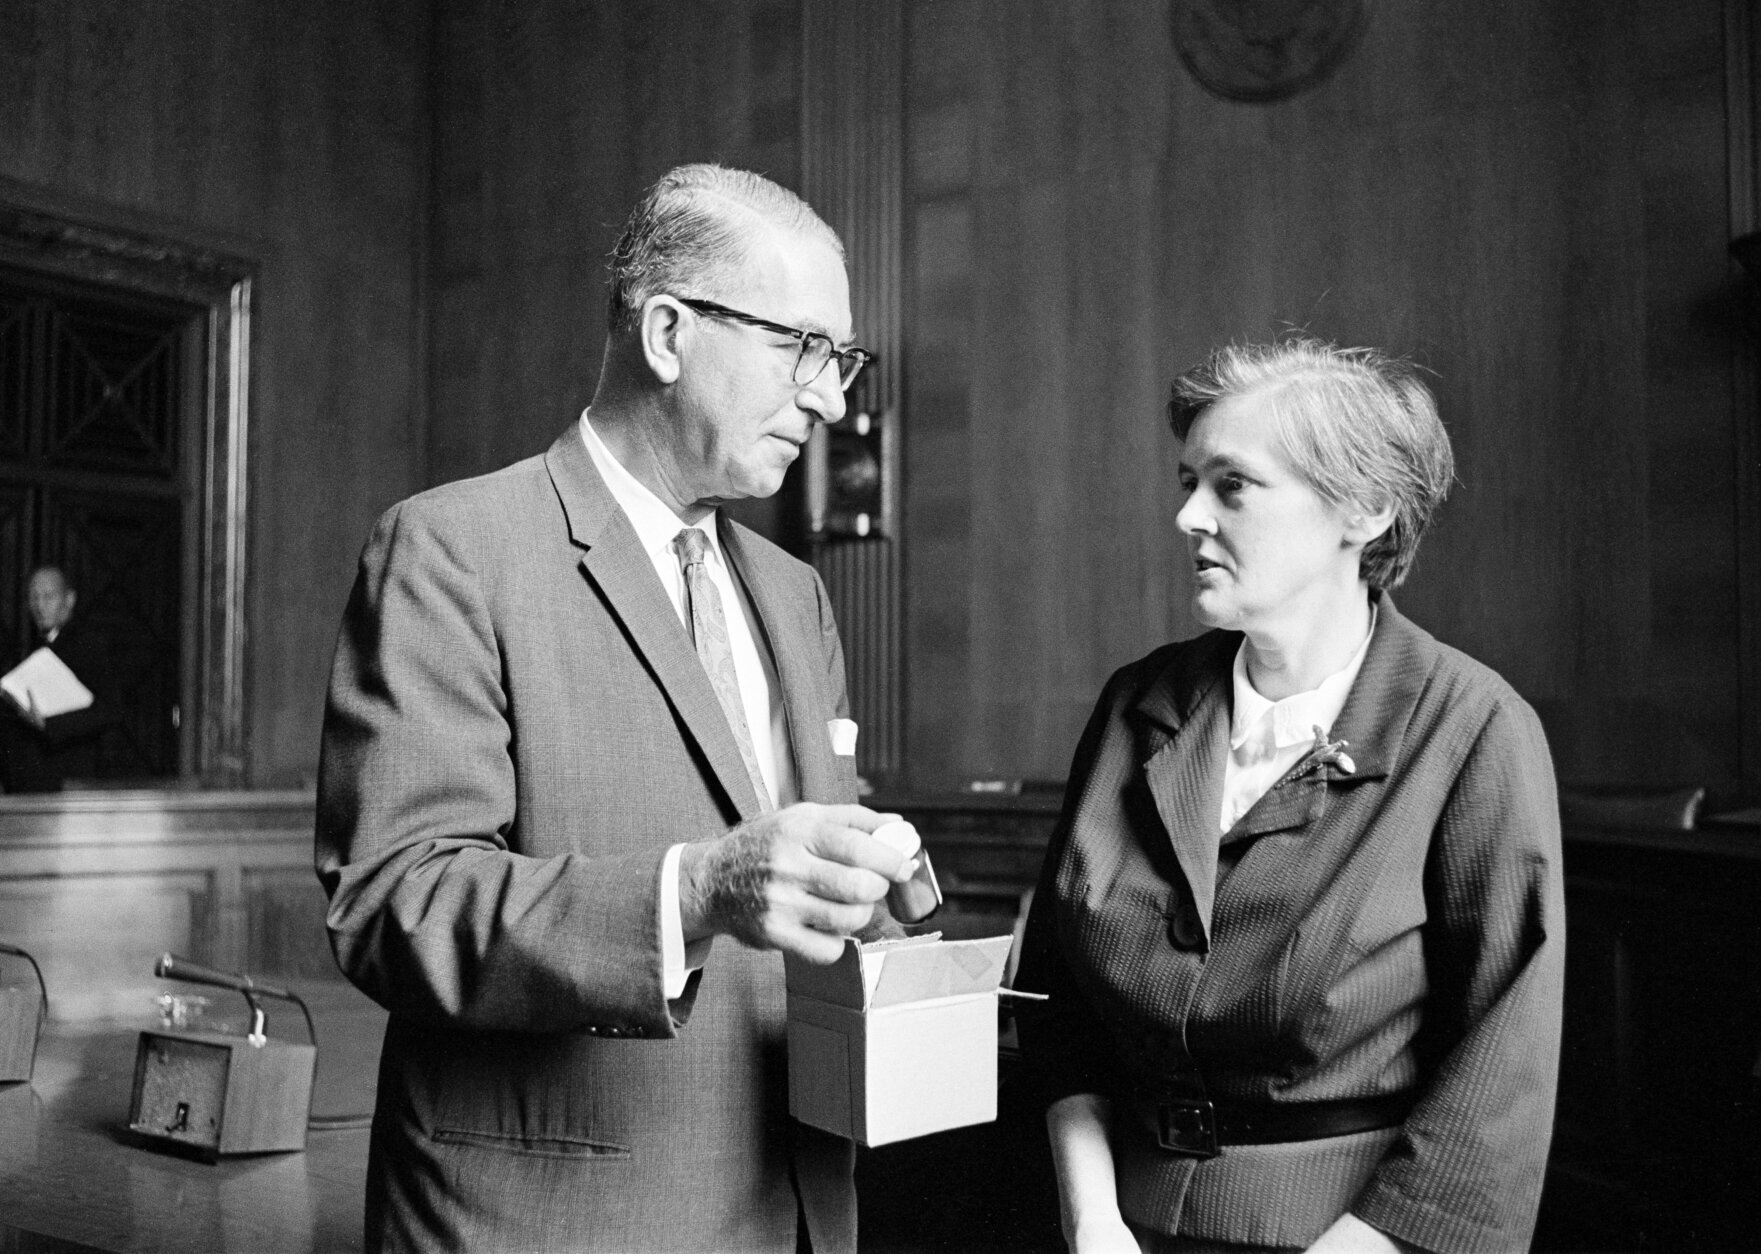 Sen. Estes Kefauver, D-Tenn., takes a bottle of thalidomide from a box as he talks with Dr. Frances Kelsey of the Food and Drug Administration, Aug. 6, 1962, in Washington. Dr. Kelsey met with the Senate judiciary Committee behind closed doors to testify in Washington on President Kennedy's proposed amendments to drug control legislation sponsored by Kefauver. (AP Photo/Henry Griffin)